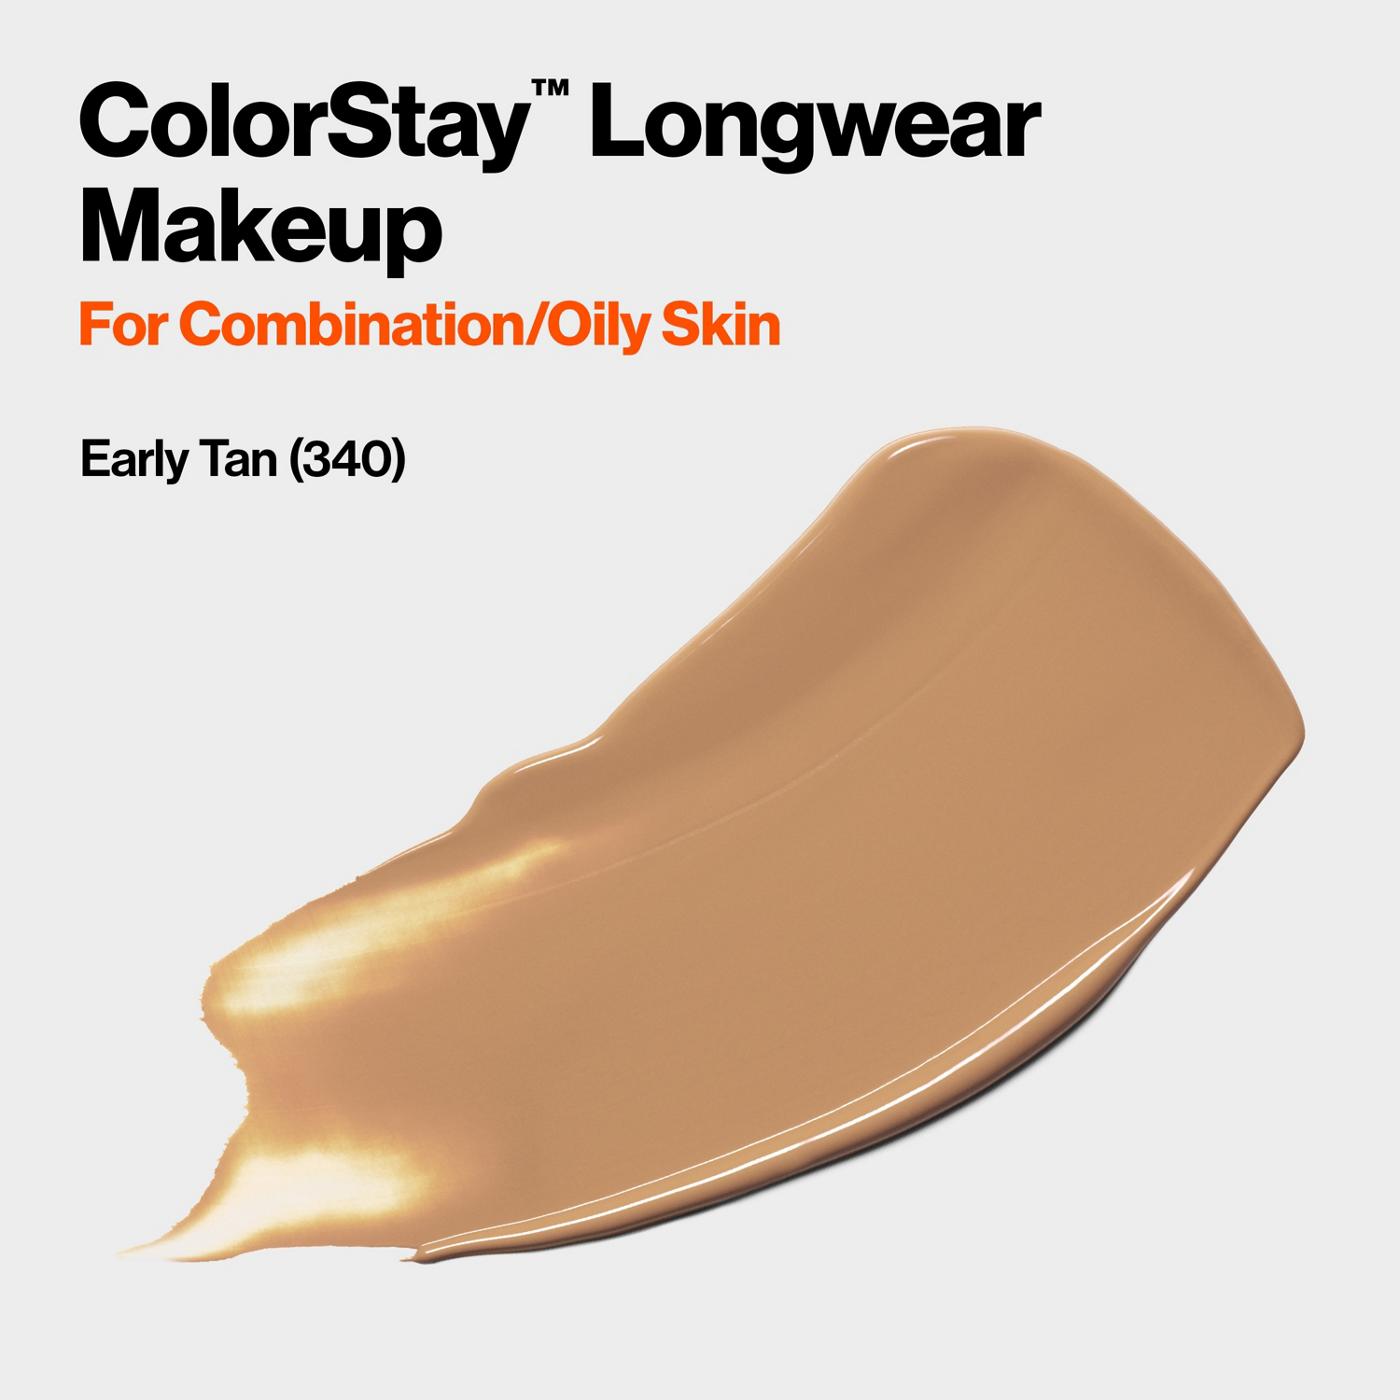 Revlon ColorStay Foundation for Combination/Oily Skin, 340 Early Tan; image 5 of 6